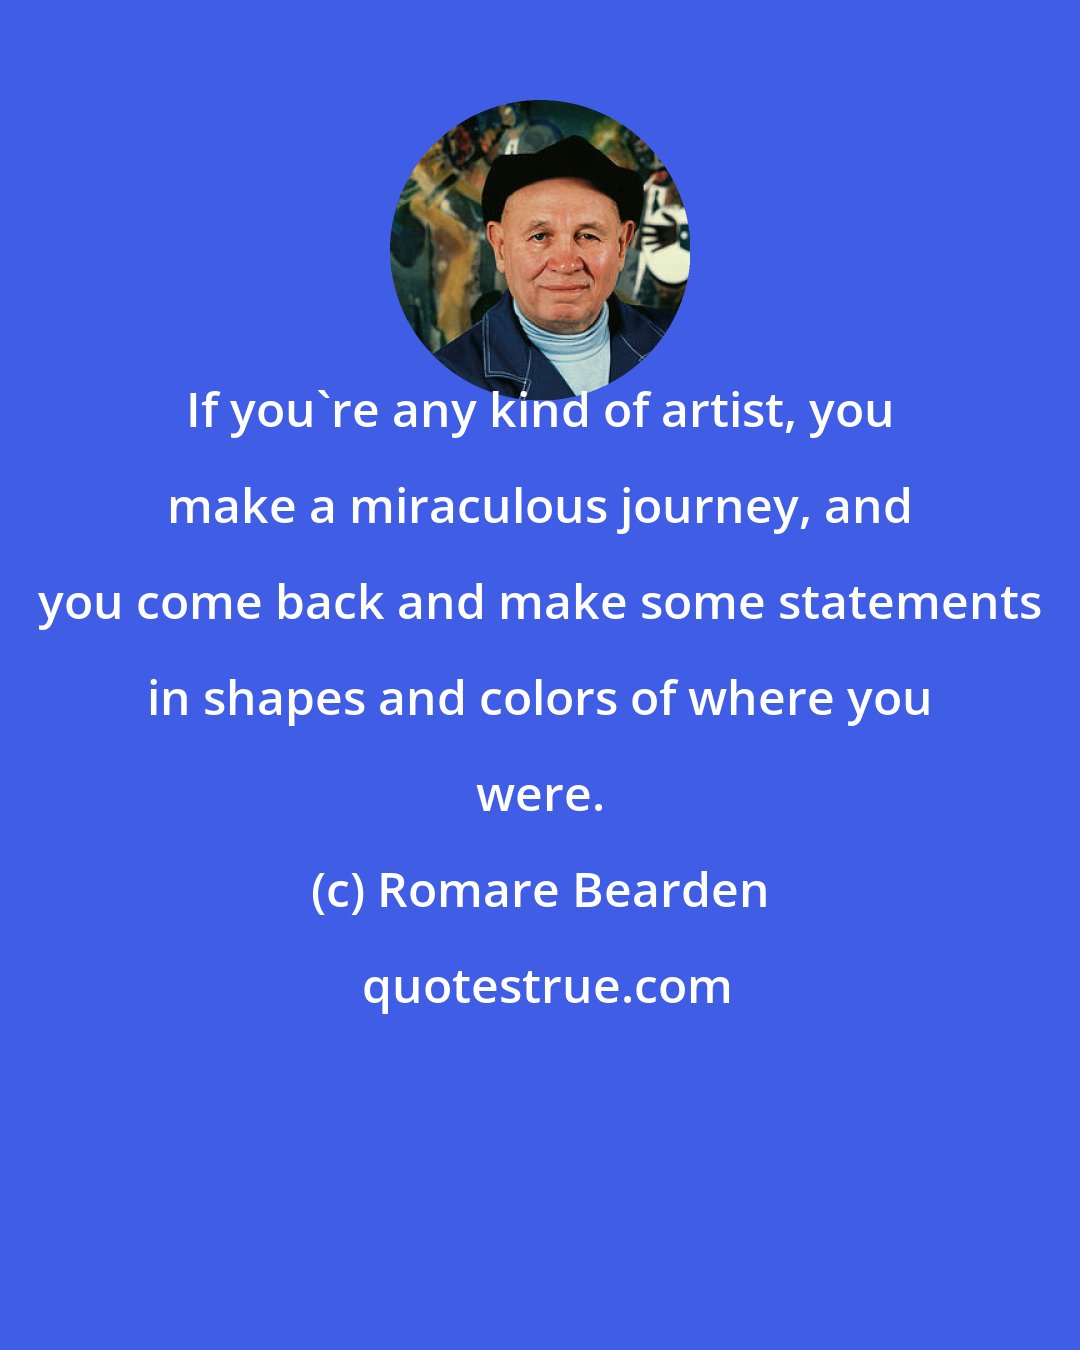 Romare Bearden: If you're any kind of artist, you make a miraculous journey, and you come back and make some statements in shapes and colors of where you were.